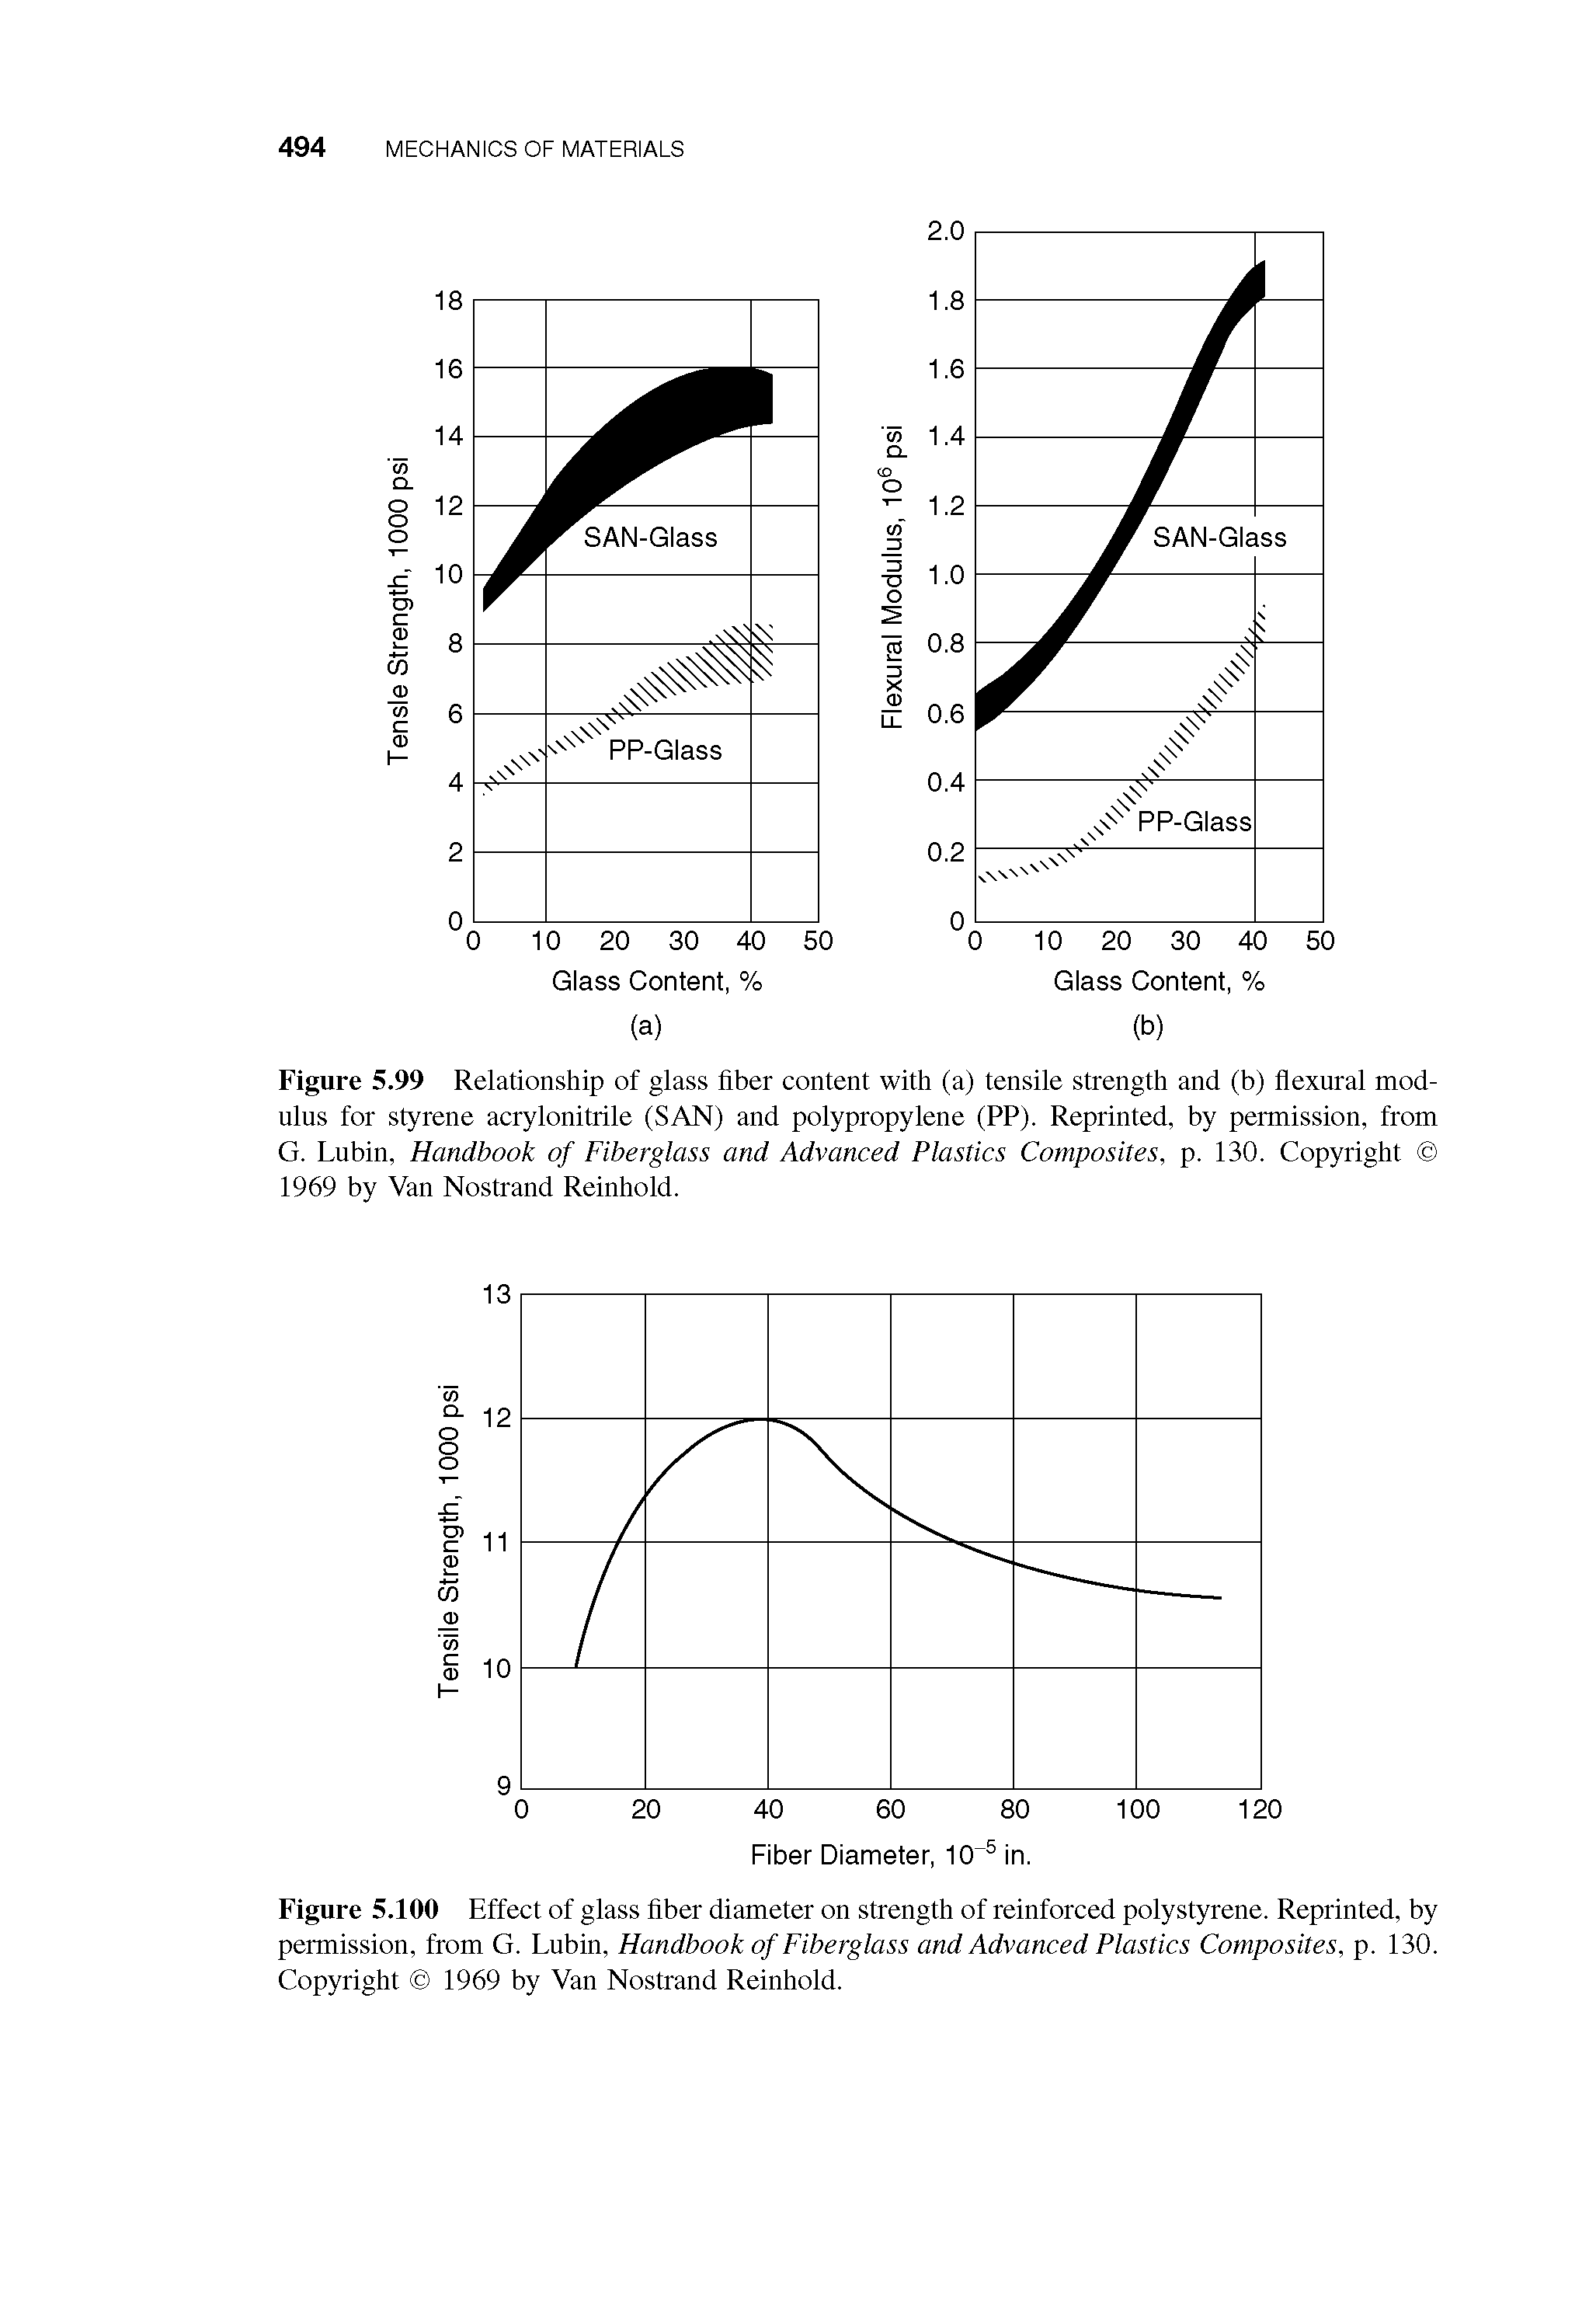 Figure 5.99 Relationship of glass fiber content with (a) tensile strength and (b) flexural modulus for styrene acrylonitrile (SAN) and polypropylene (PP). Reprinted, by permission, from G. Lubin, Handbook of Fiberglass and Advanced Plastics Composites, p. 130. Copyright 1969 by Van Nostrand Reinhold.